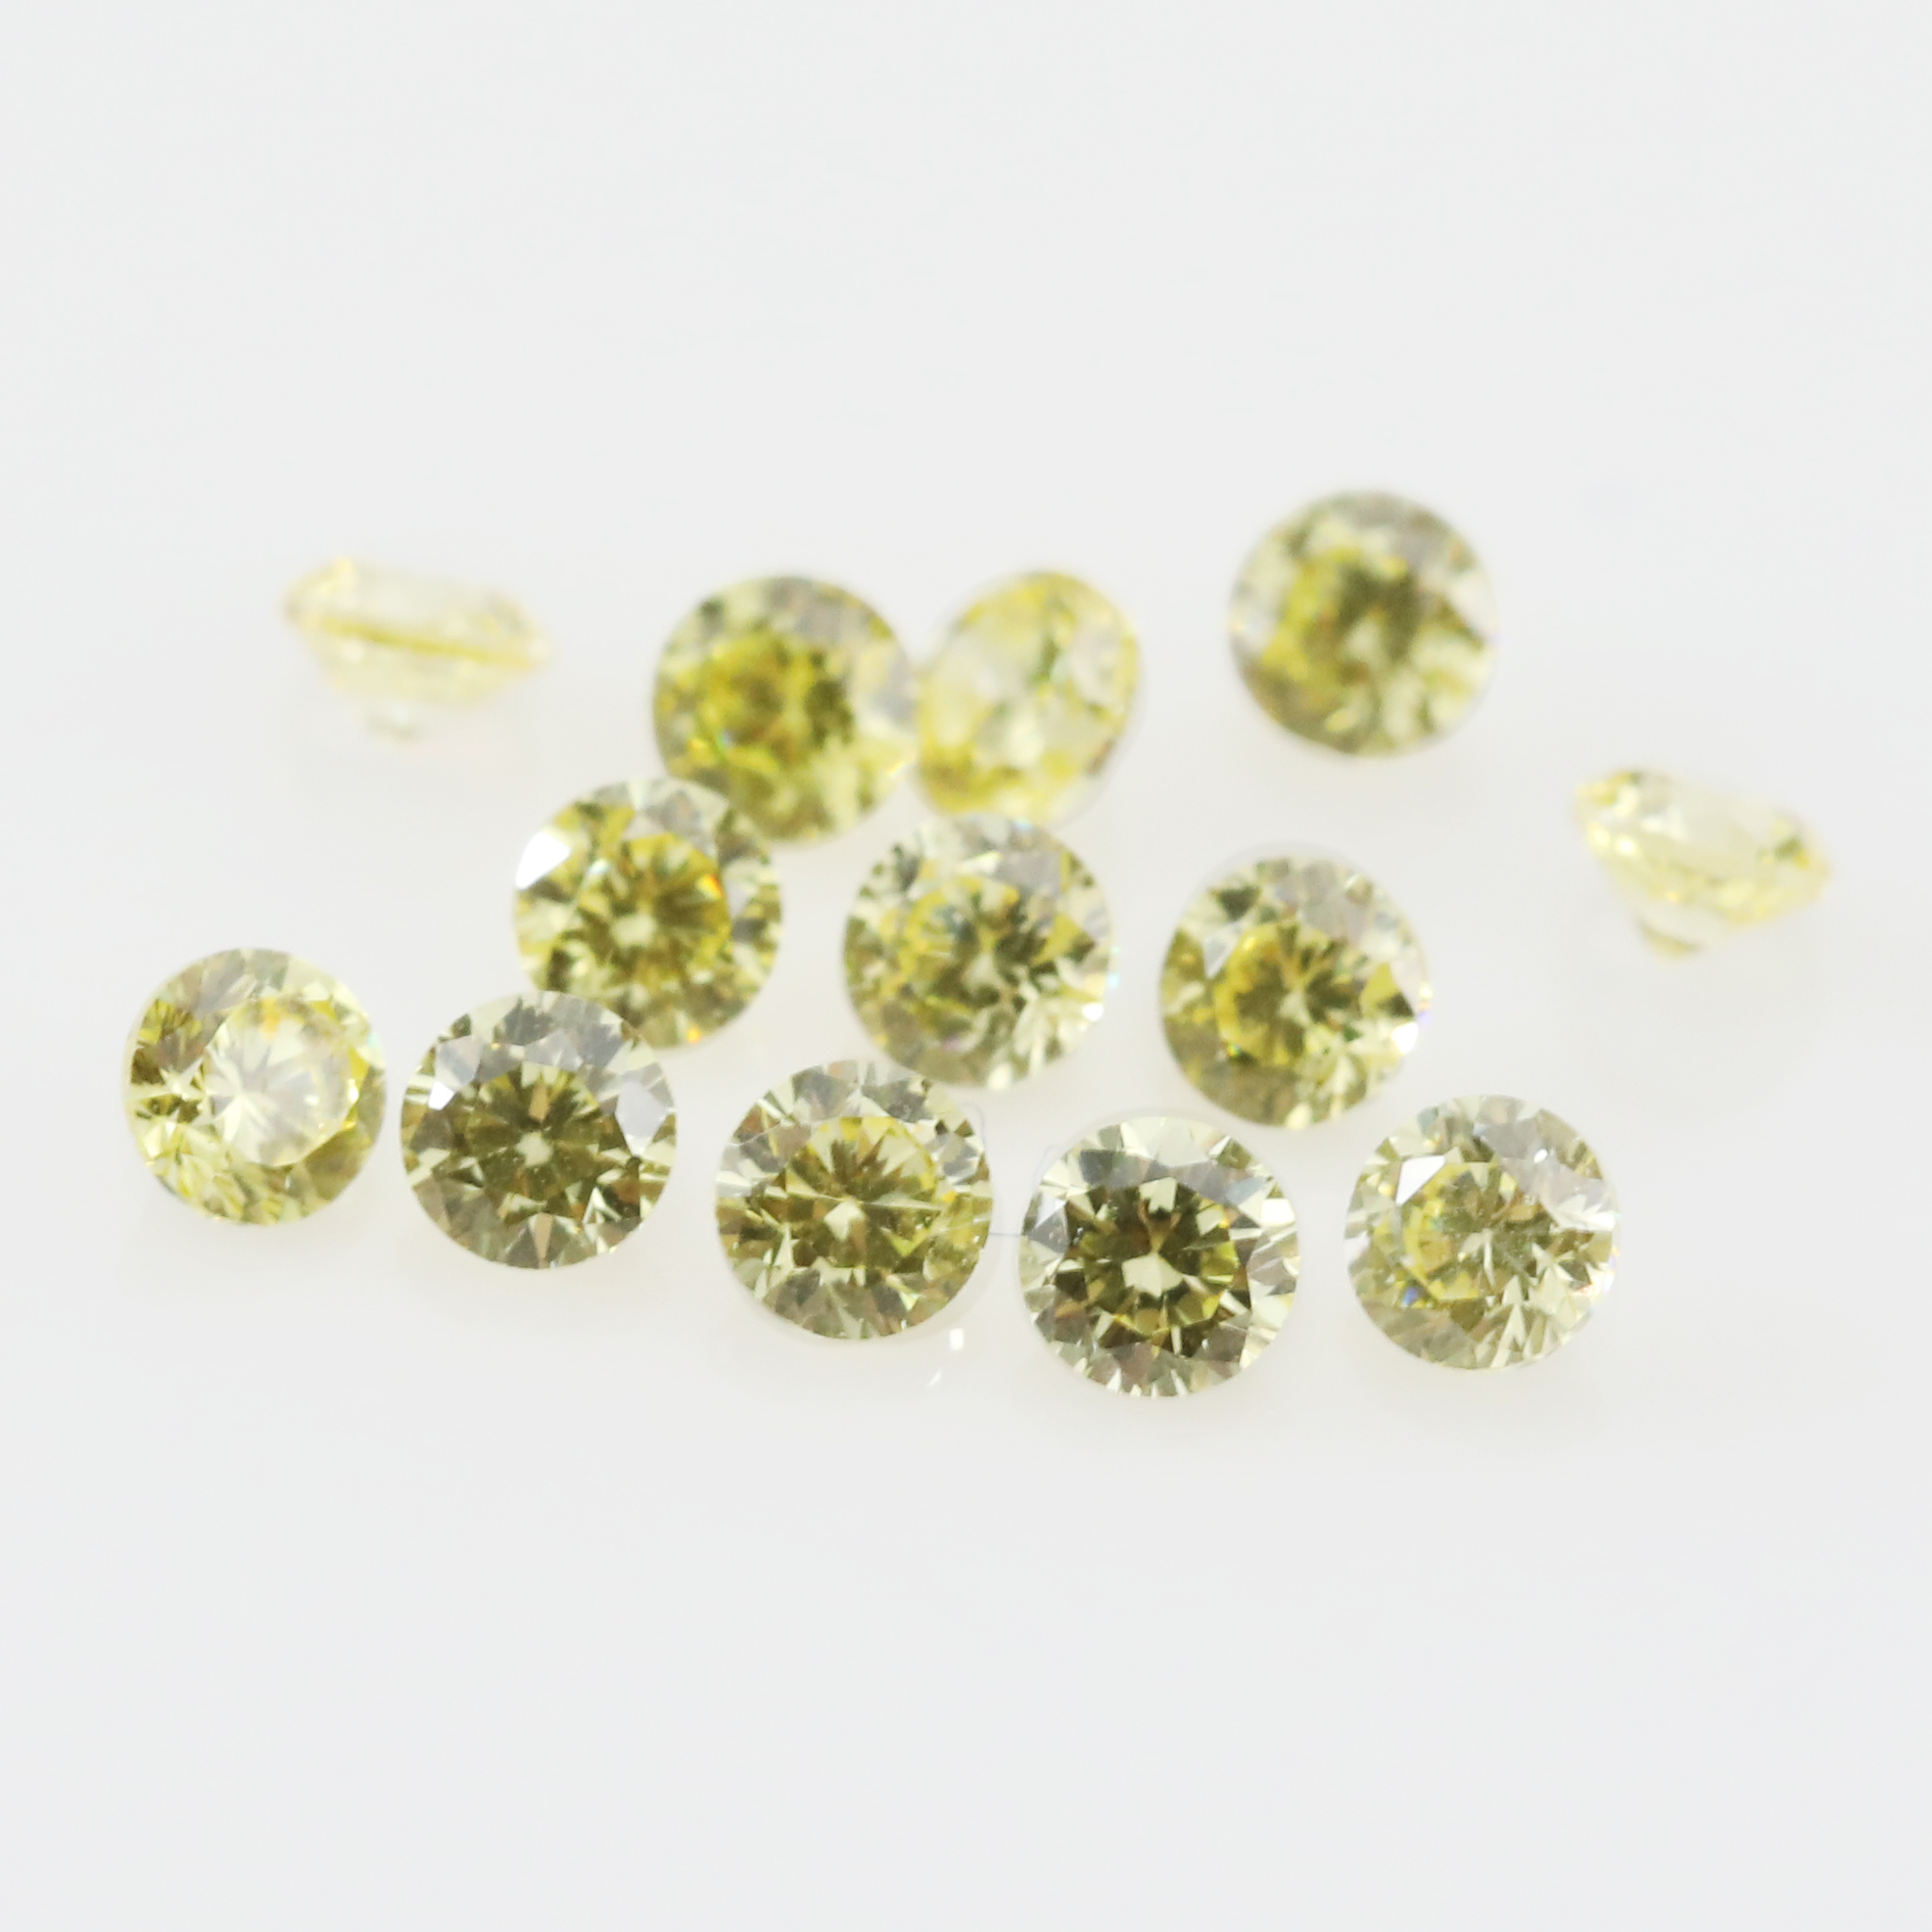 50Pcs 2MM Imitation Birthstone Round Faceted Color Cubic Zirconia CZ Stone DIY Loose Stone Supplies 4110183-2MM - Click Image to Close